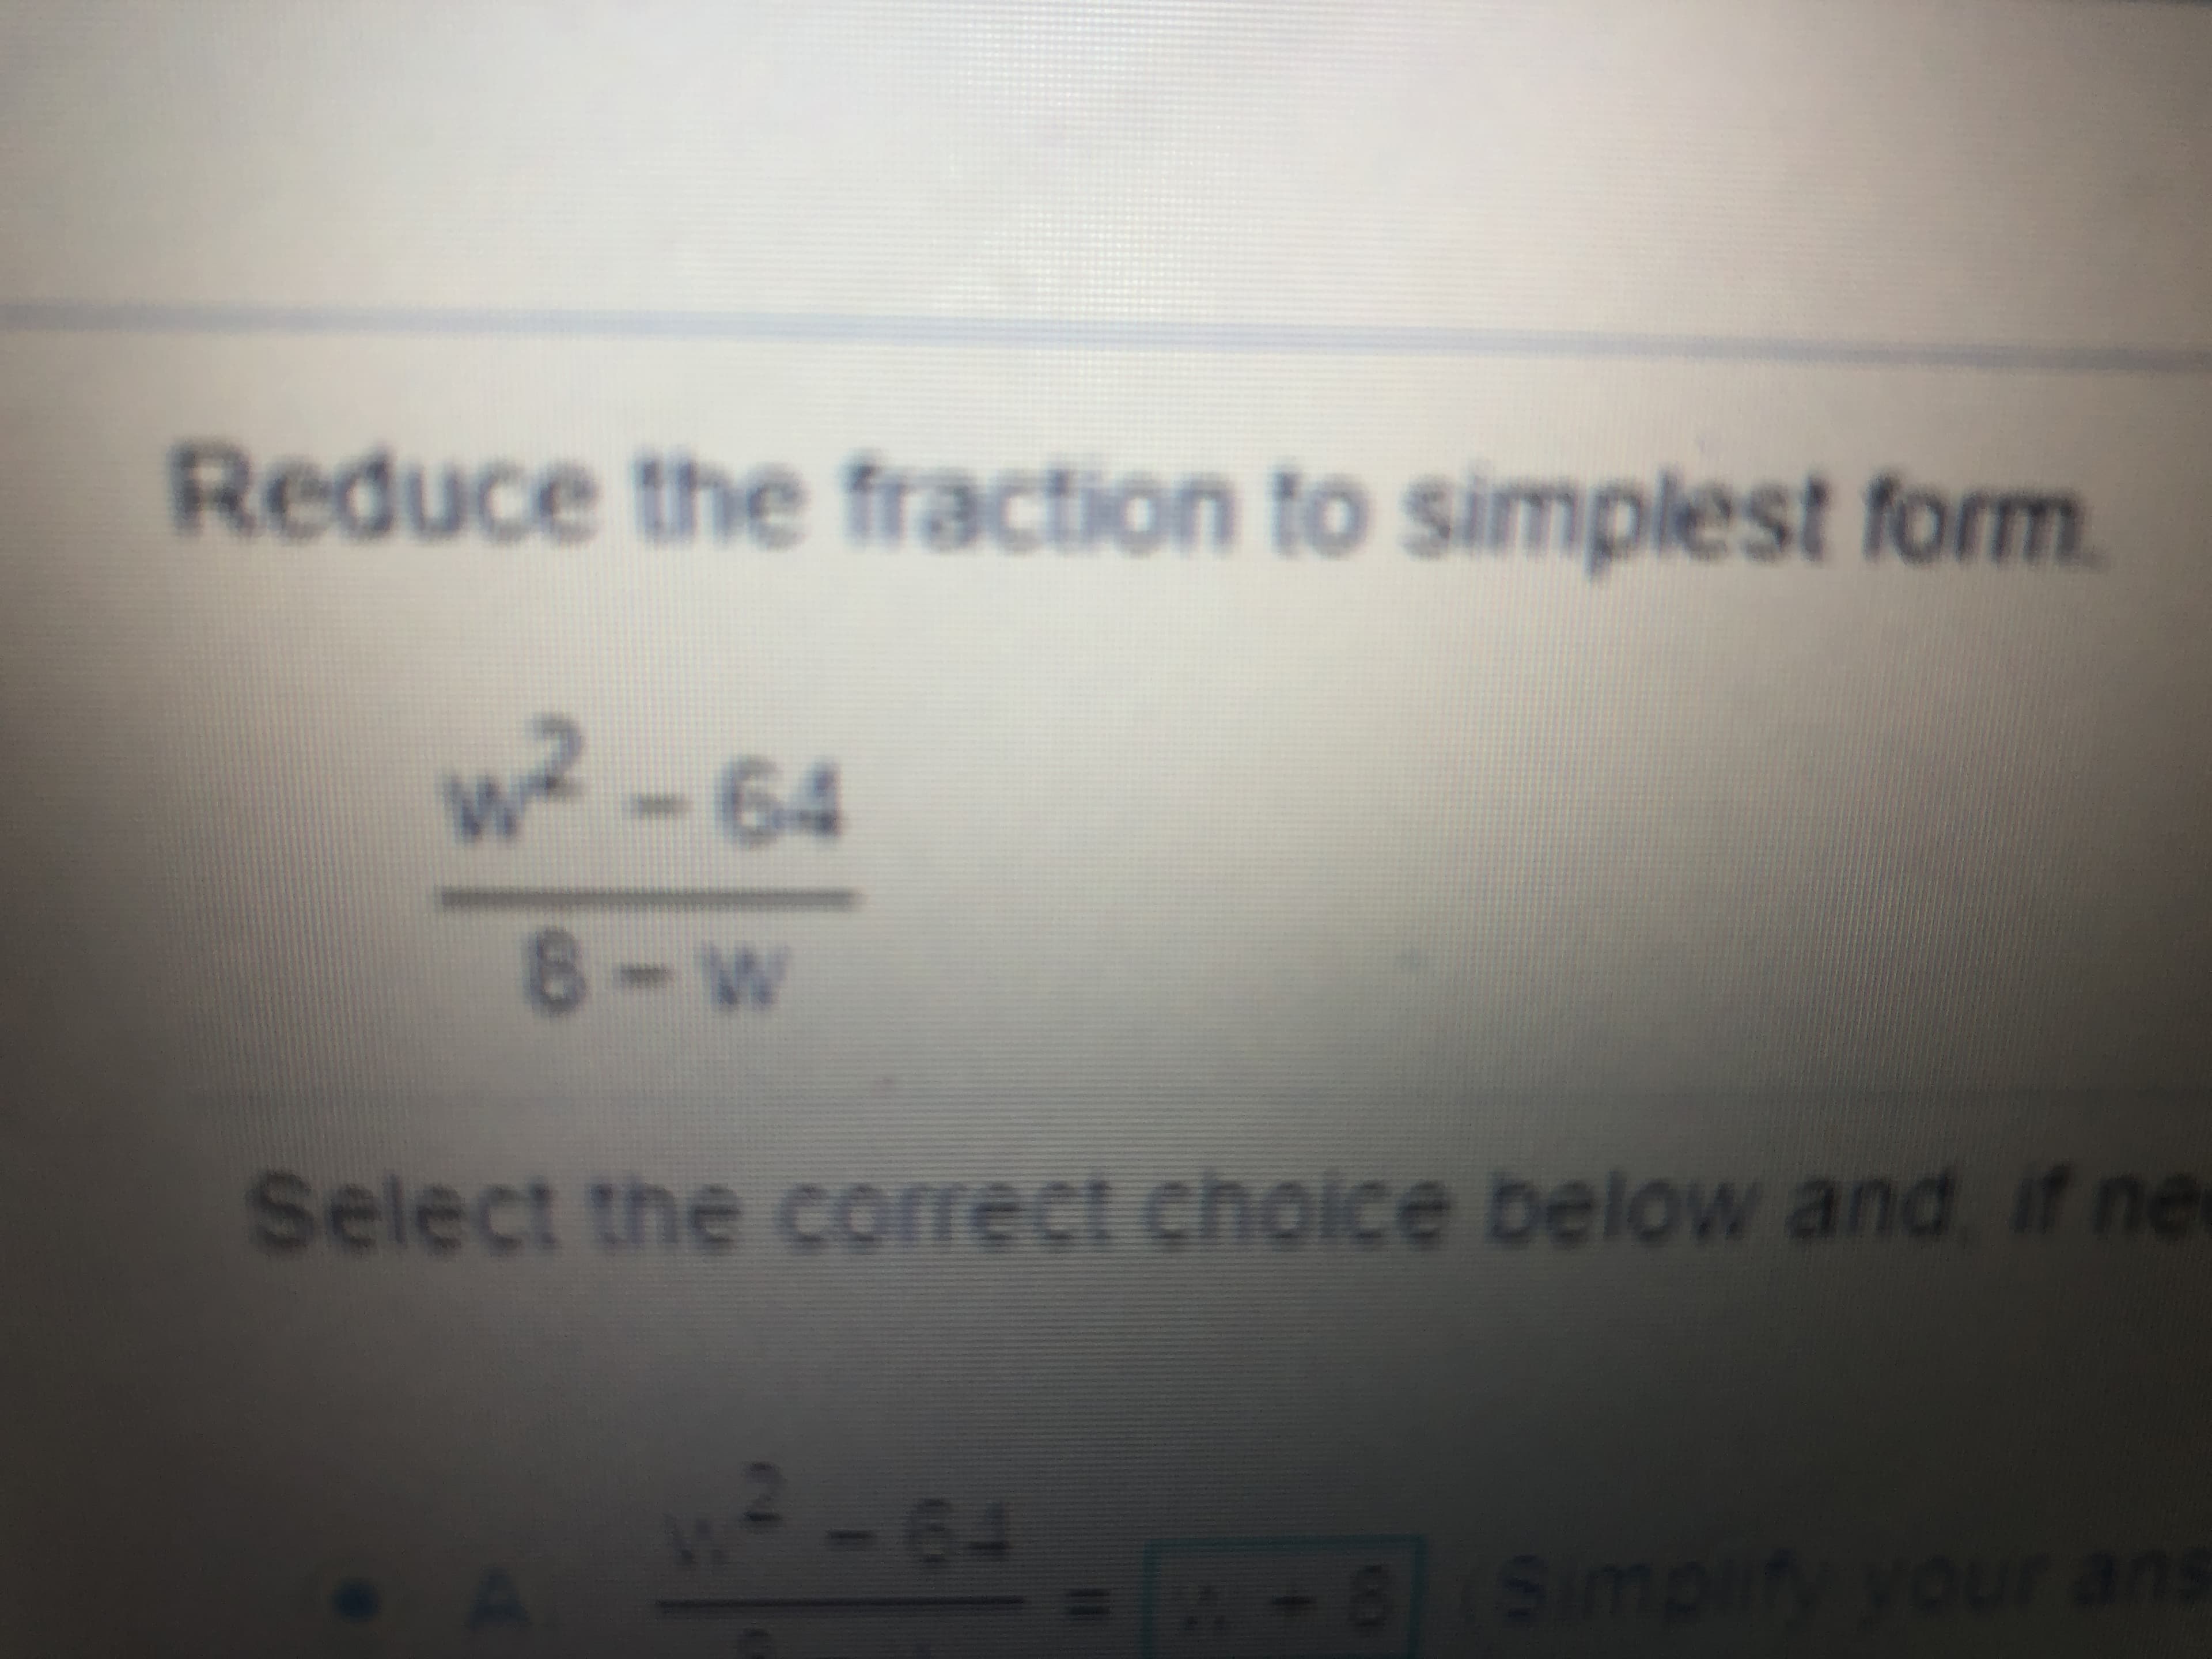 Reduce the fraction to simplest form
w²-64
8-W
